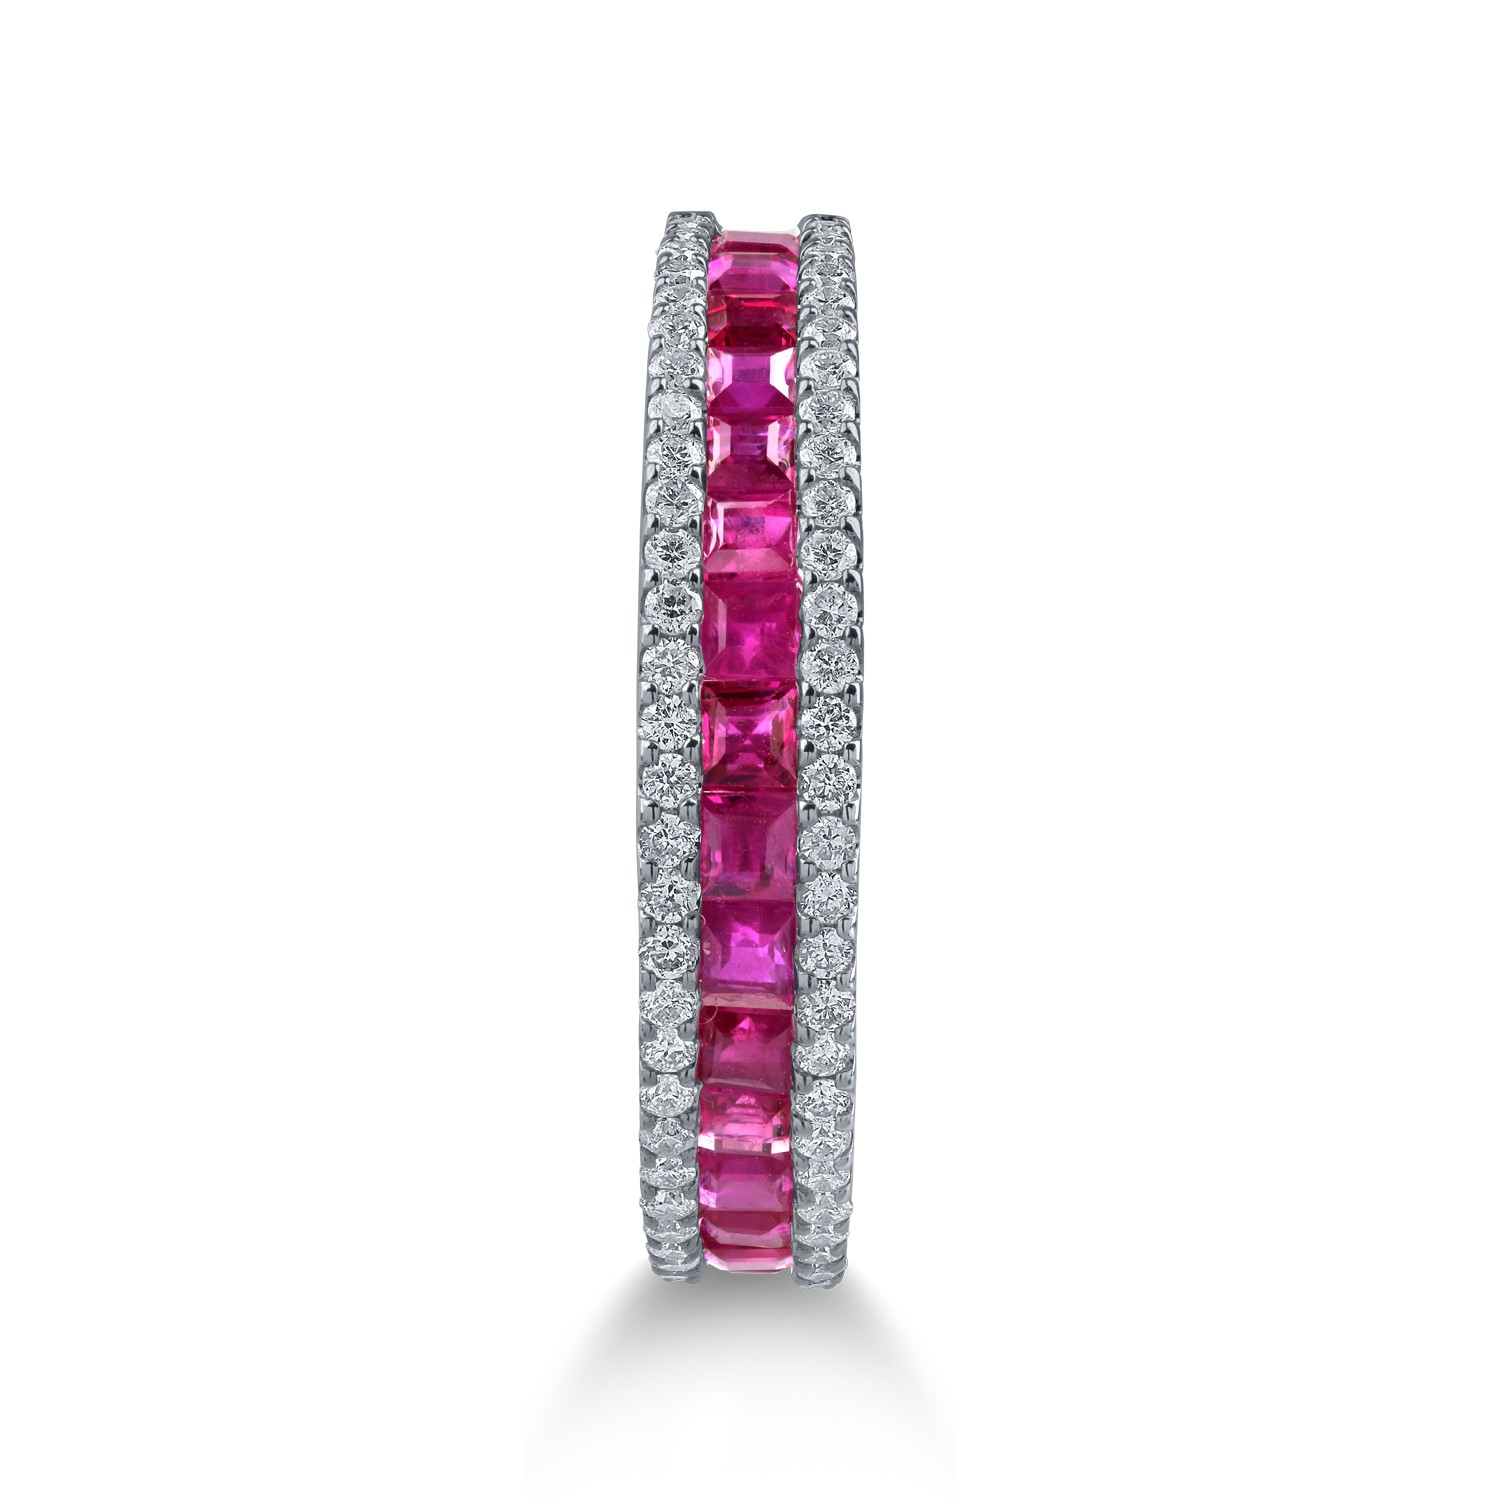 Half eternity ring in white gold with 0.86ct rubies and 0.25ct diamonds